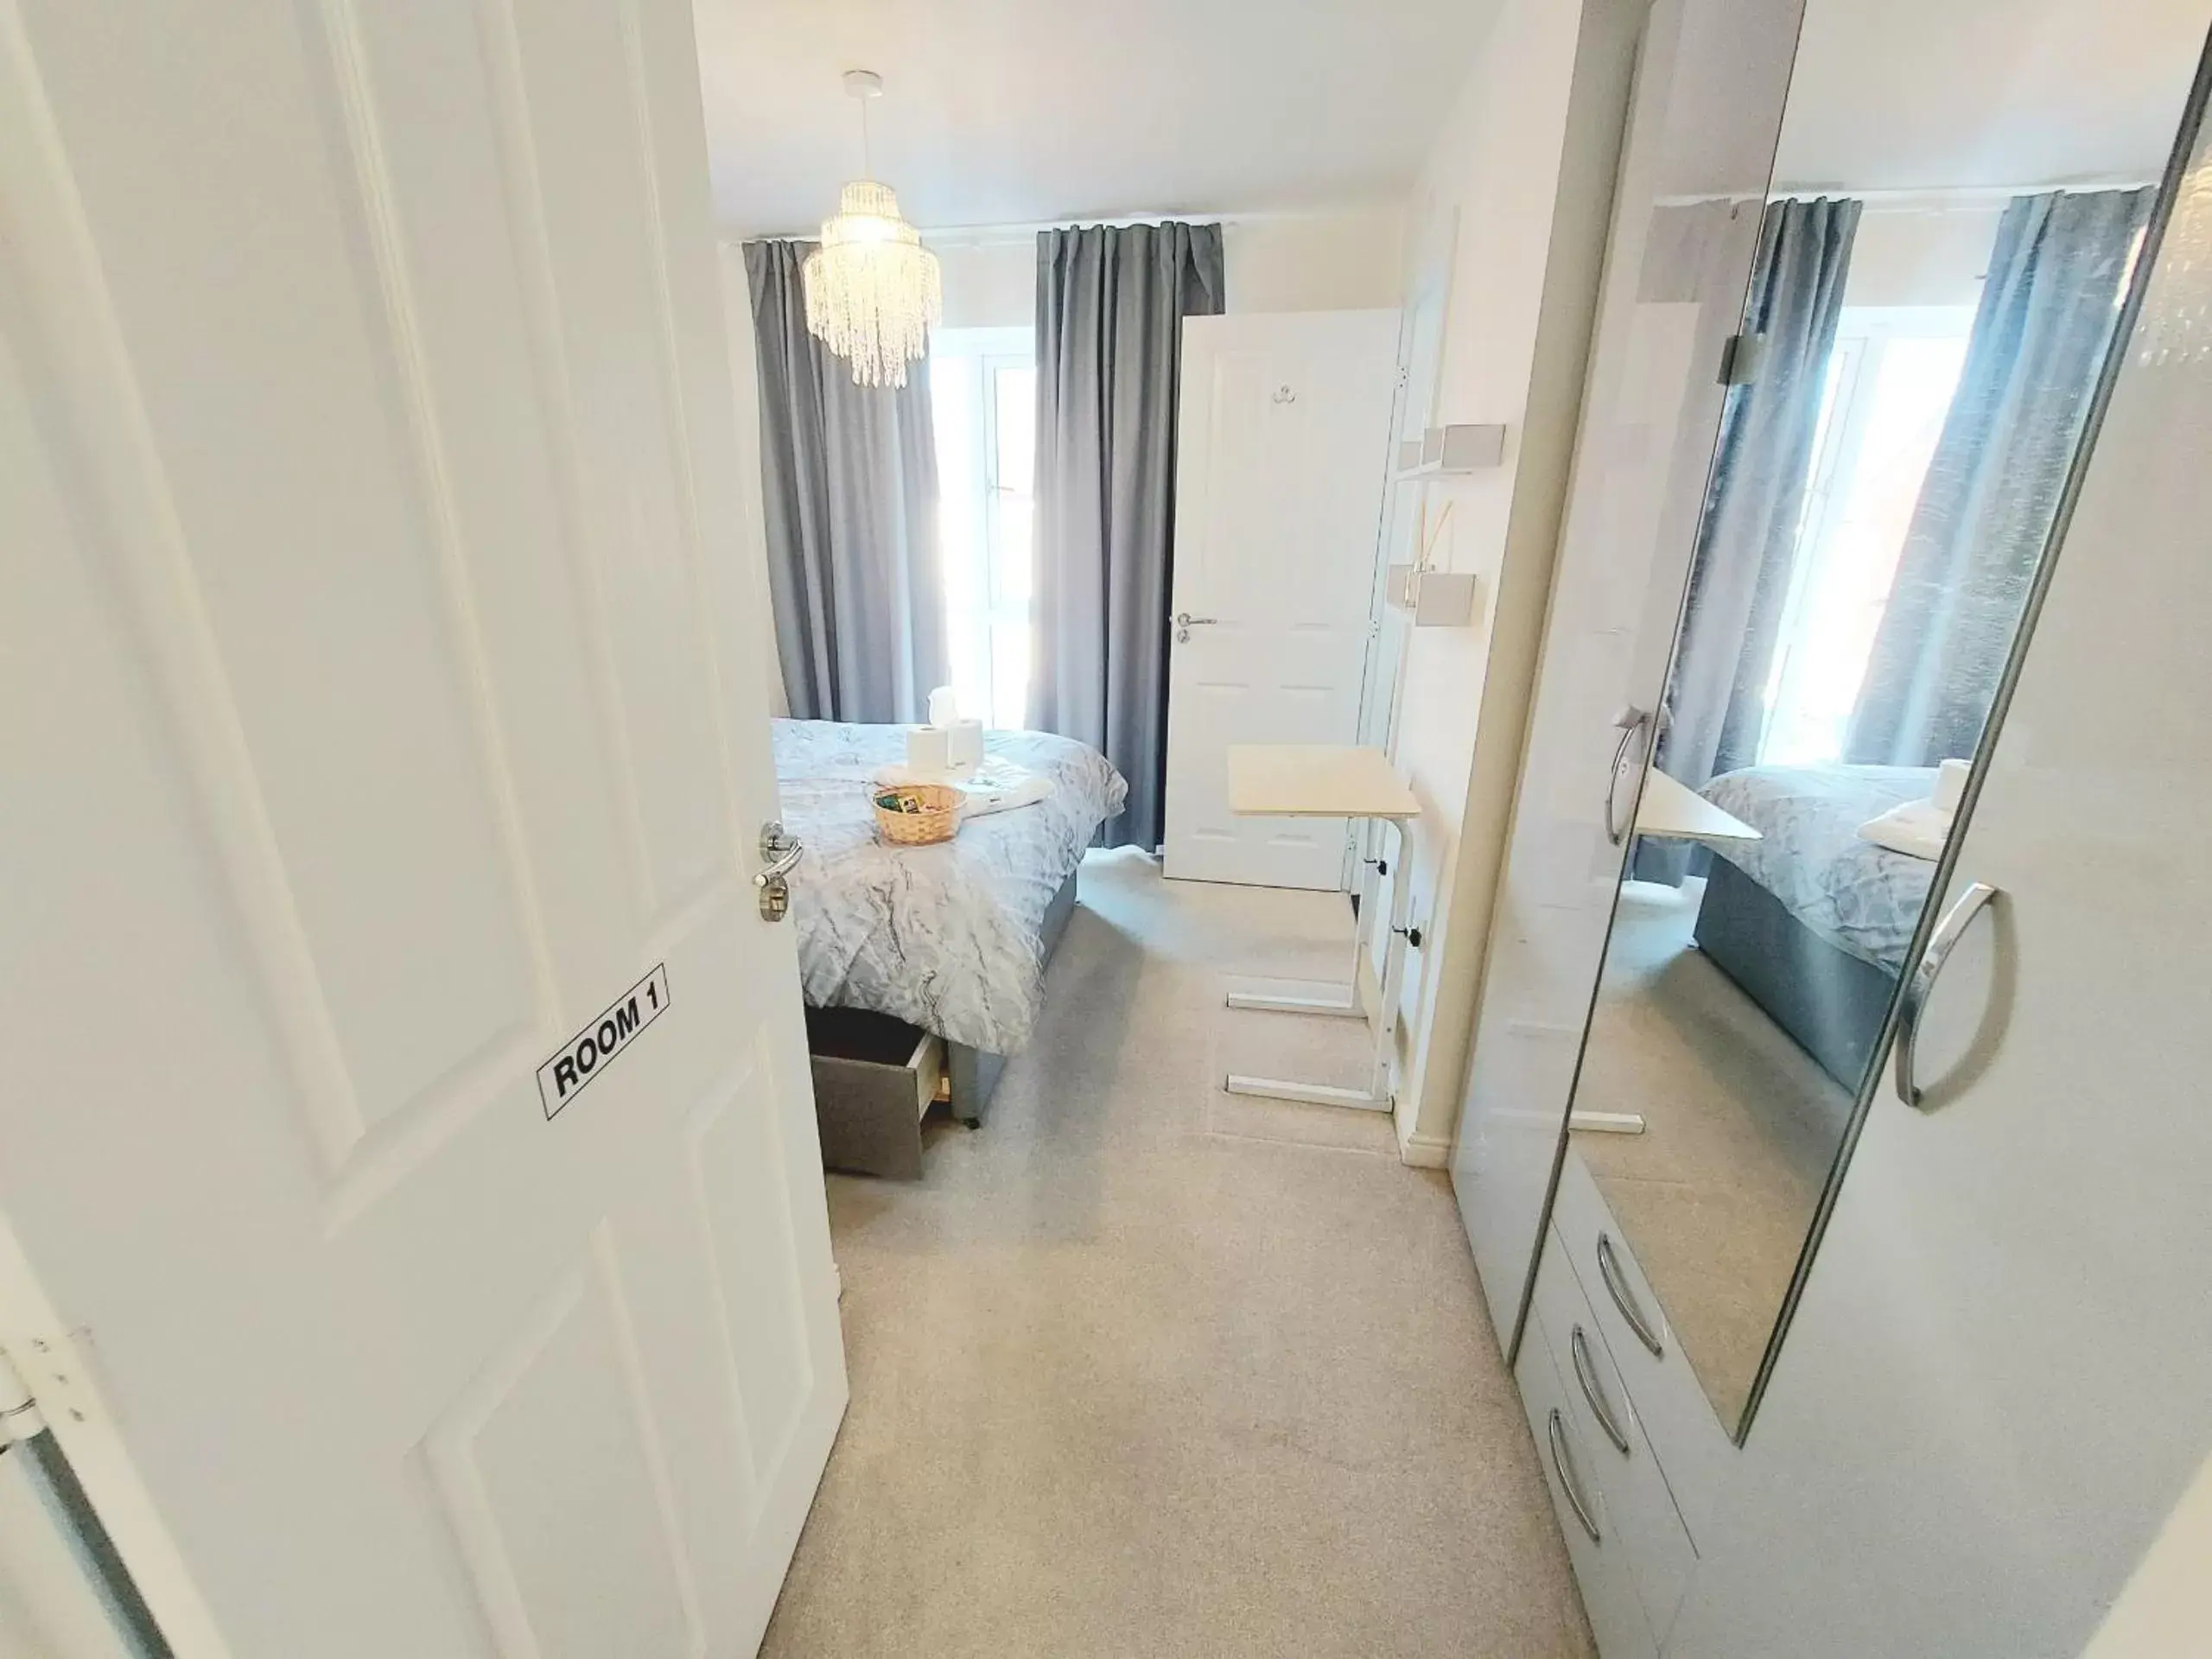 Bedroom, Dining Area in 3-BED HOME, FULL KITCHEN, ENSUITE, in TELFORD OAKENGATES KETLEY